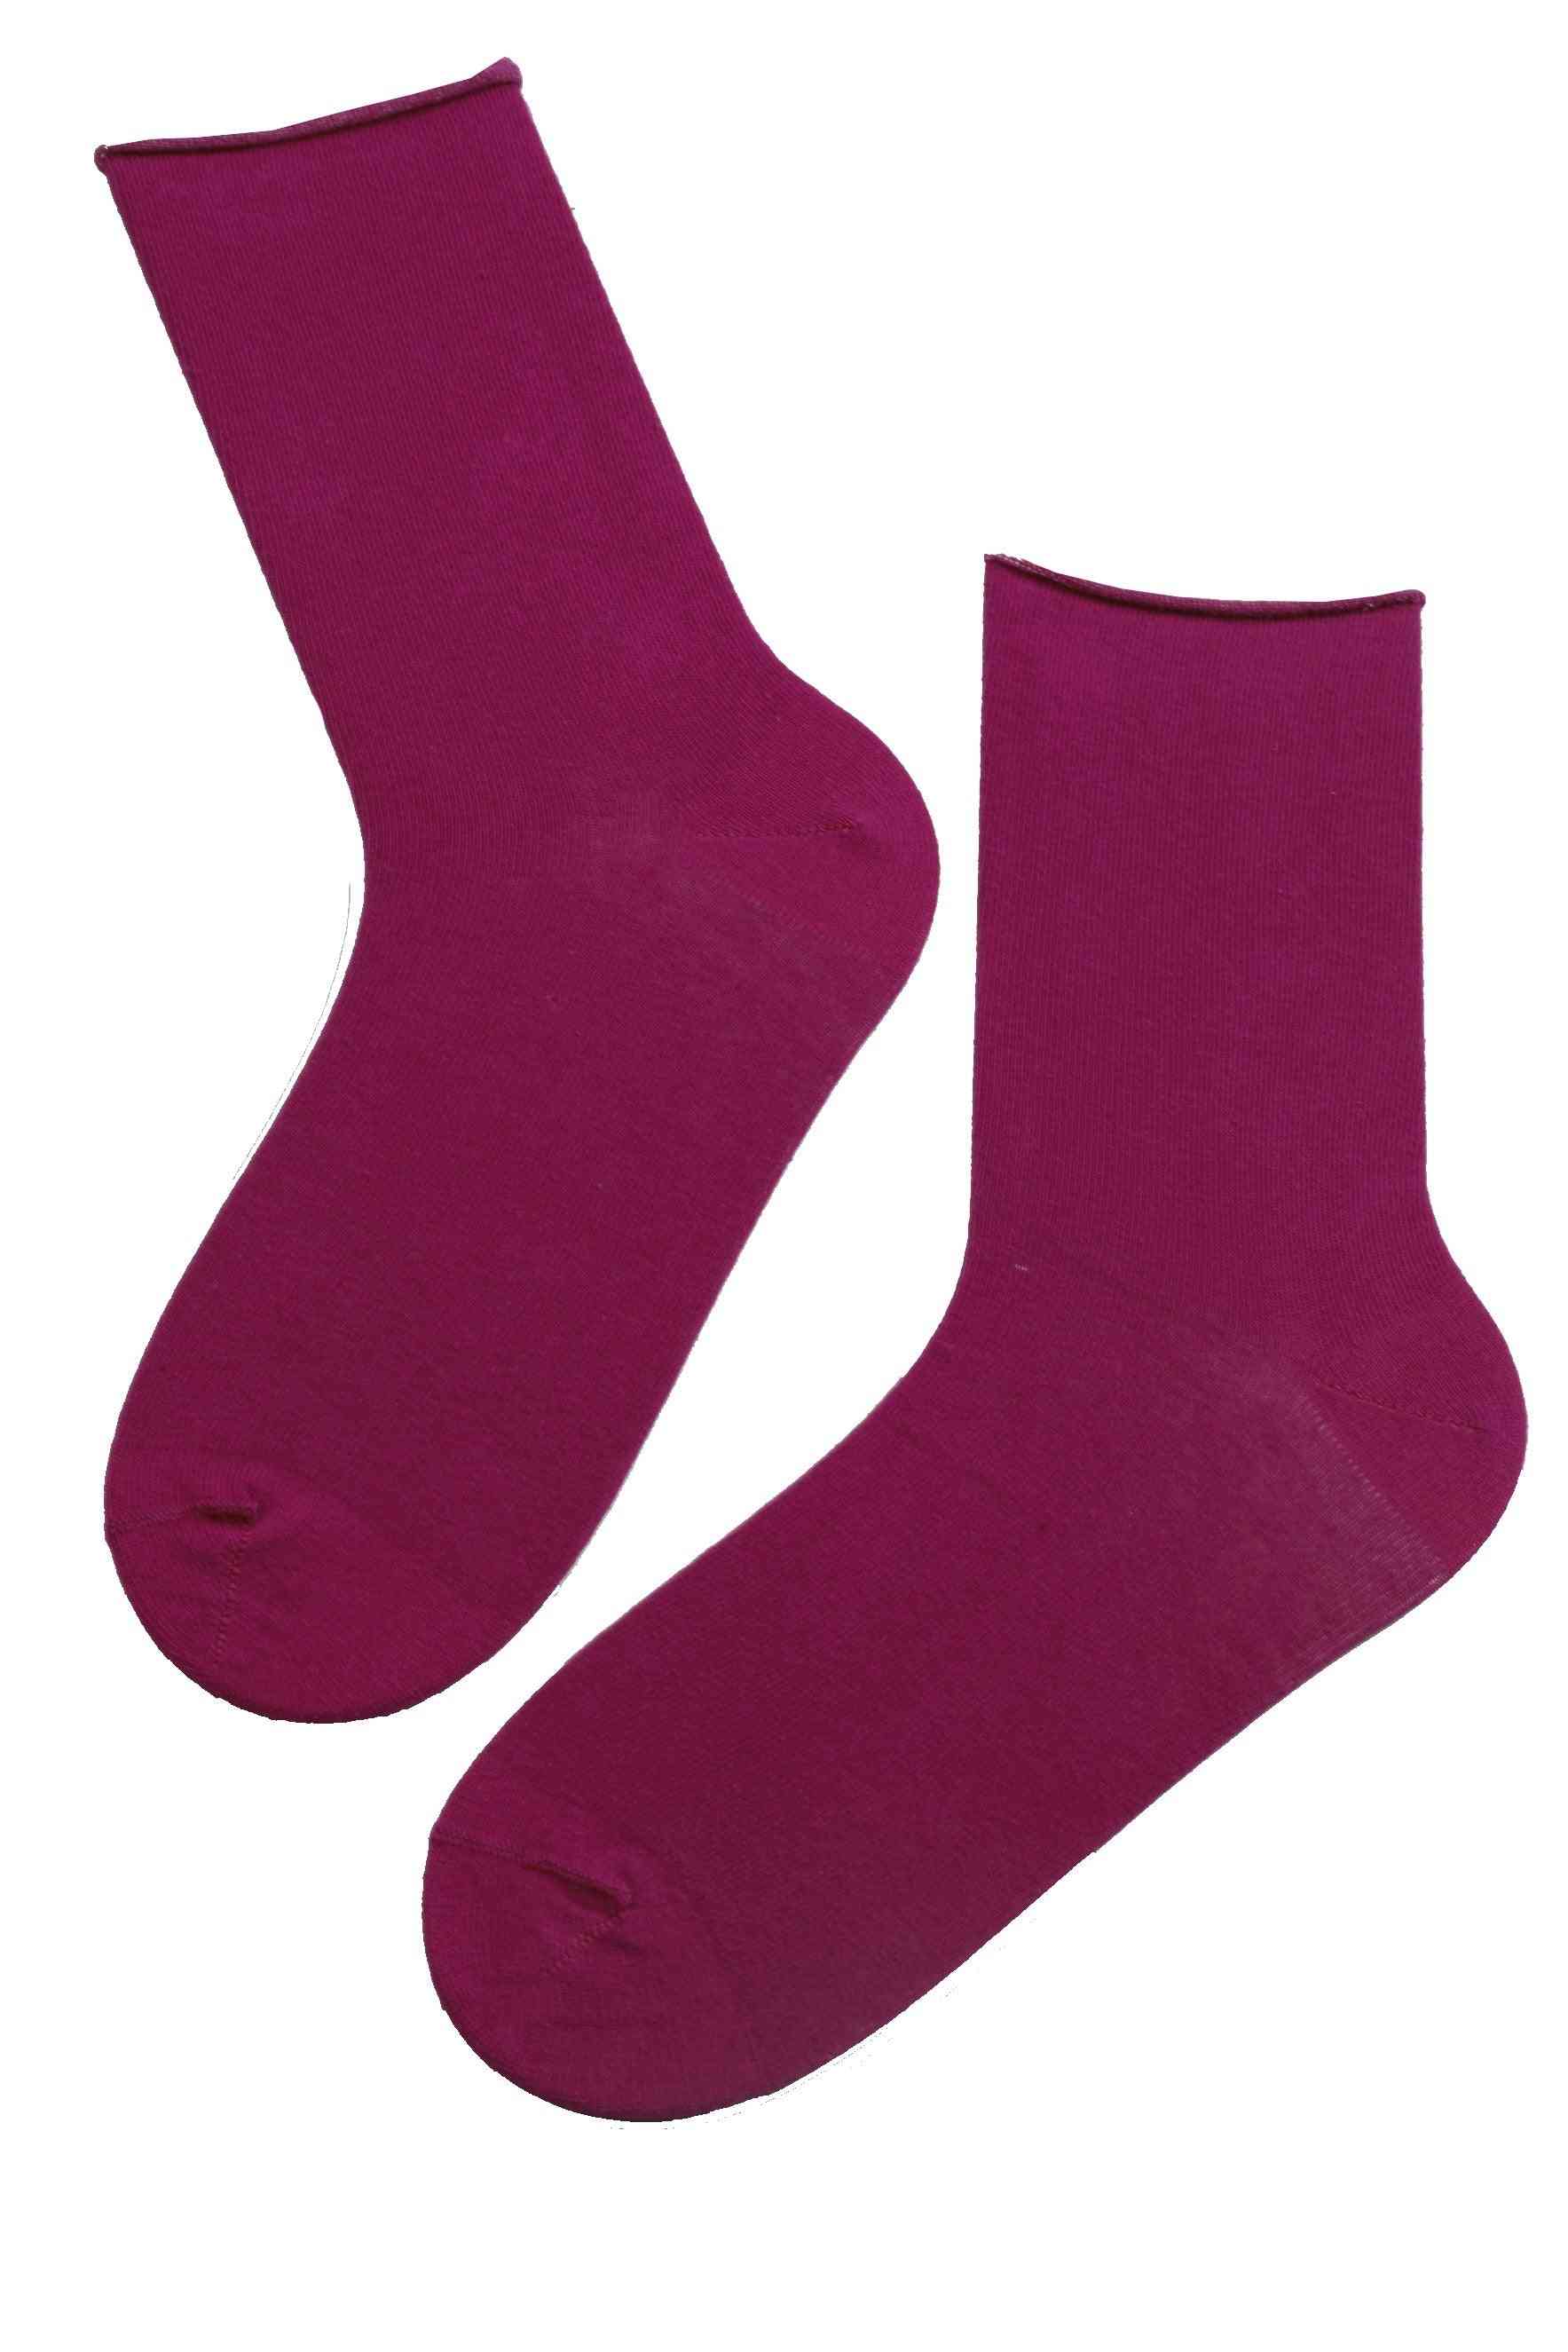 Socks With A Comfortable Edge For Men